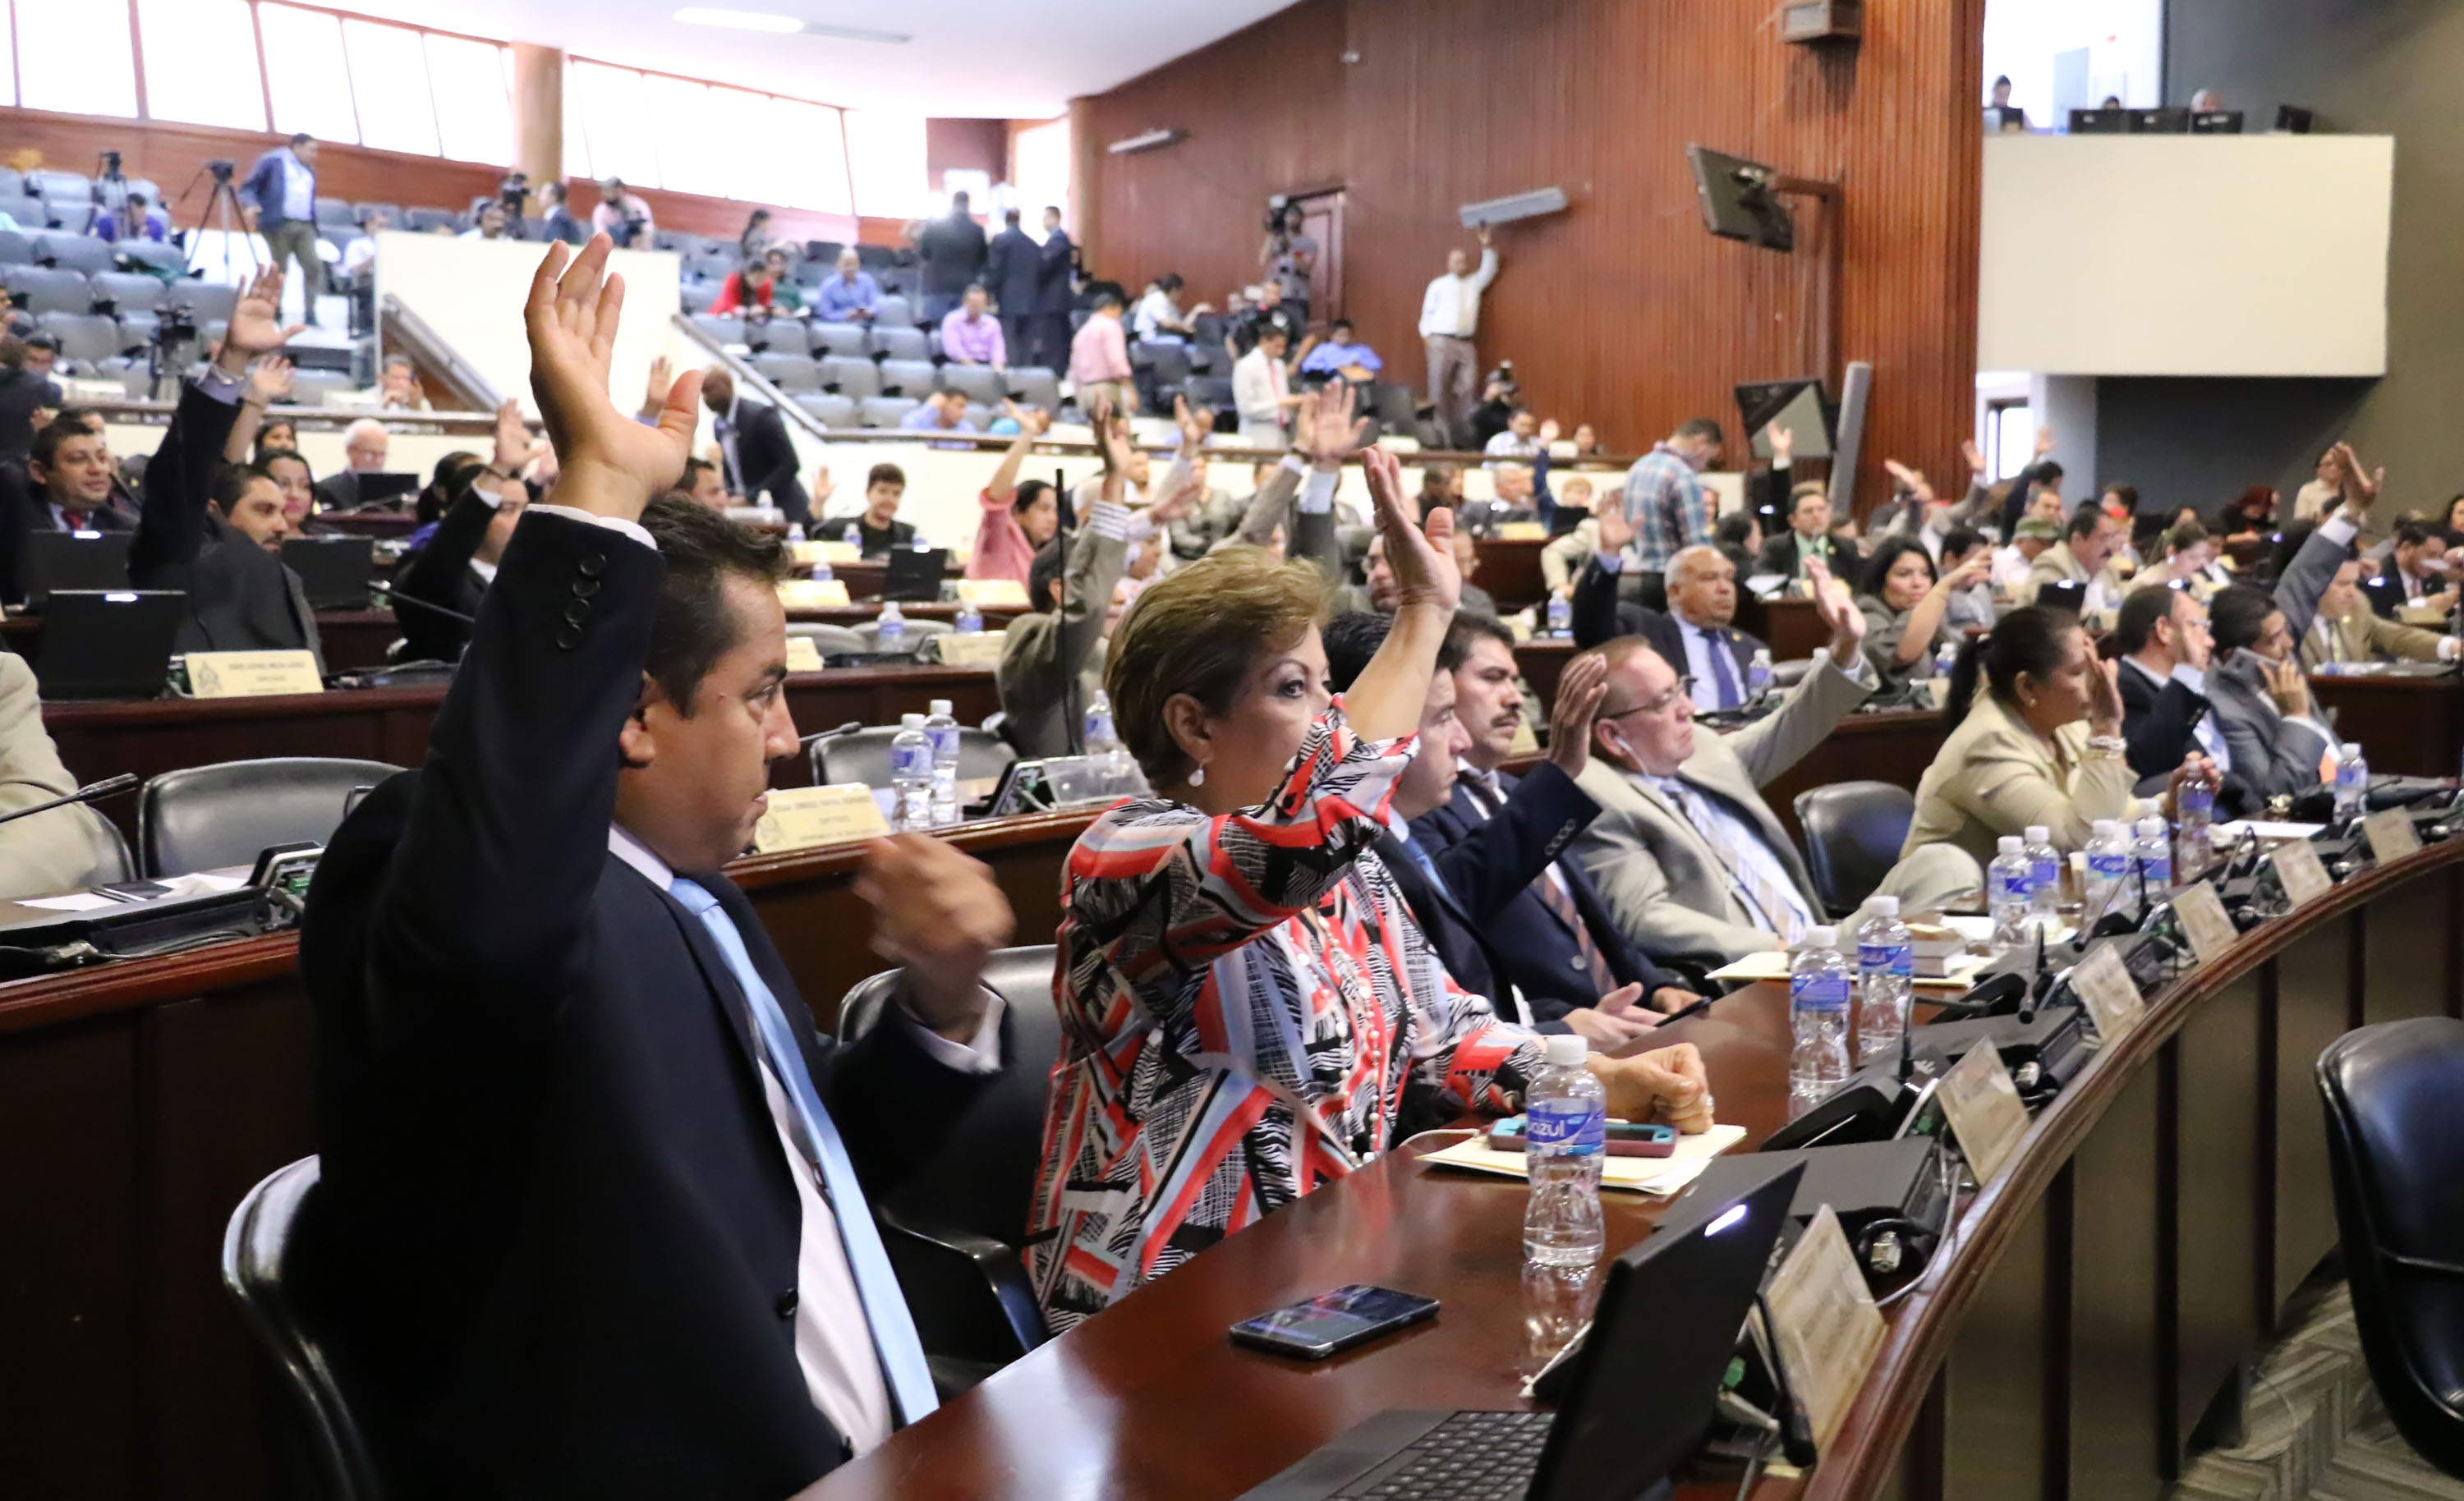 Several people raise their hands in the Honduran National Congress